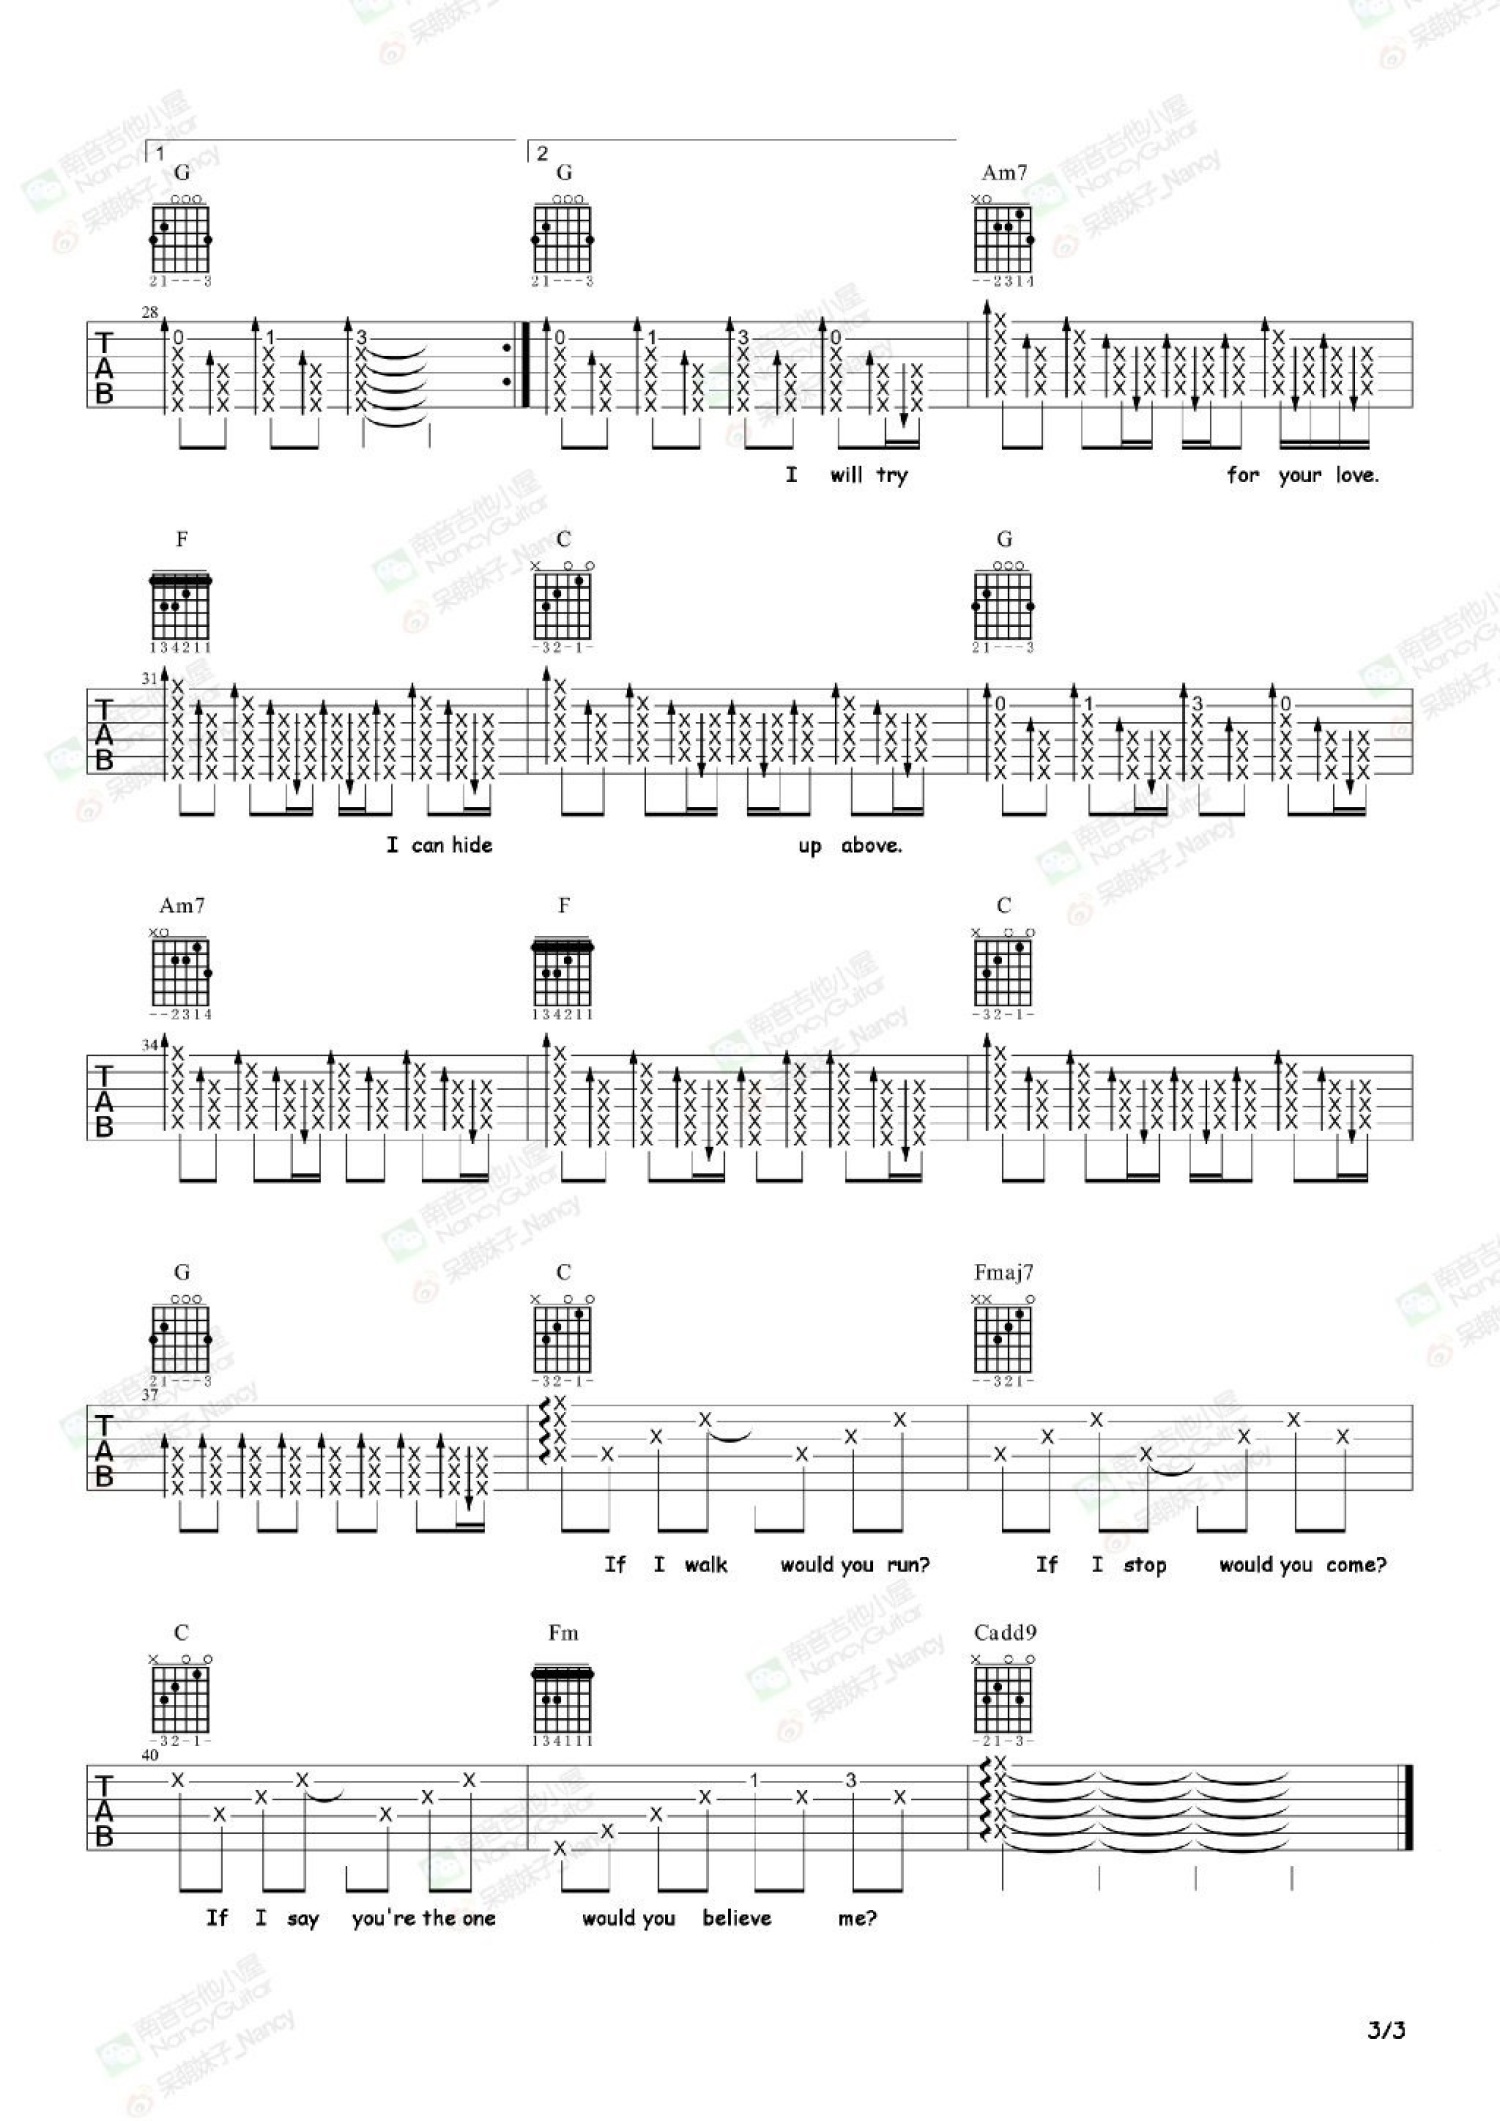 Colbie Caillat "Try" Sheet Music Notes, Chords | Guitar Tab Download ...